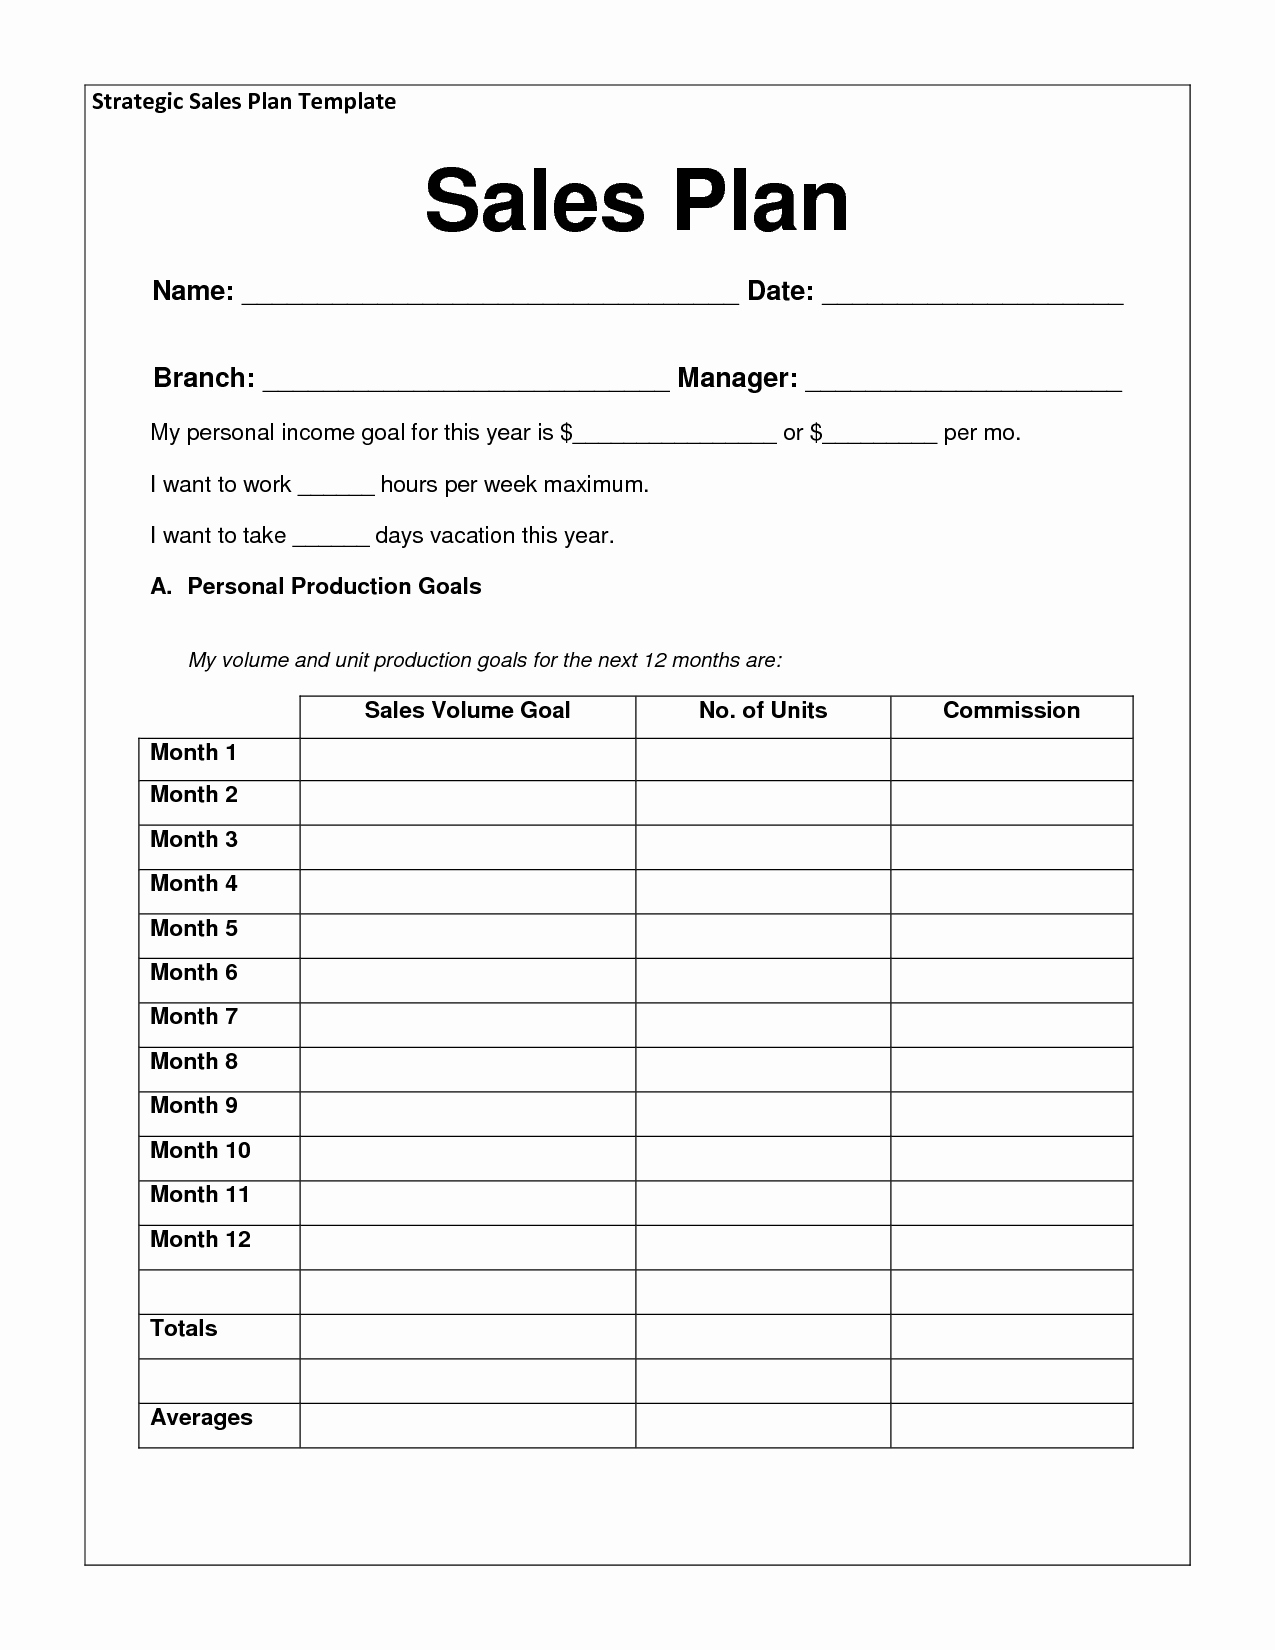 Sales Business Plan Template Lovely Sales Plan Templates Word Excel Samples